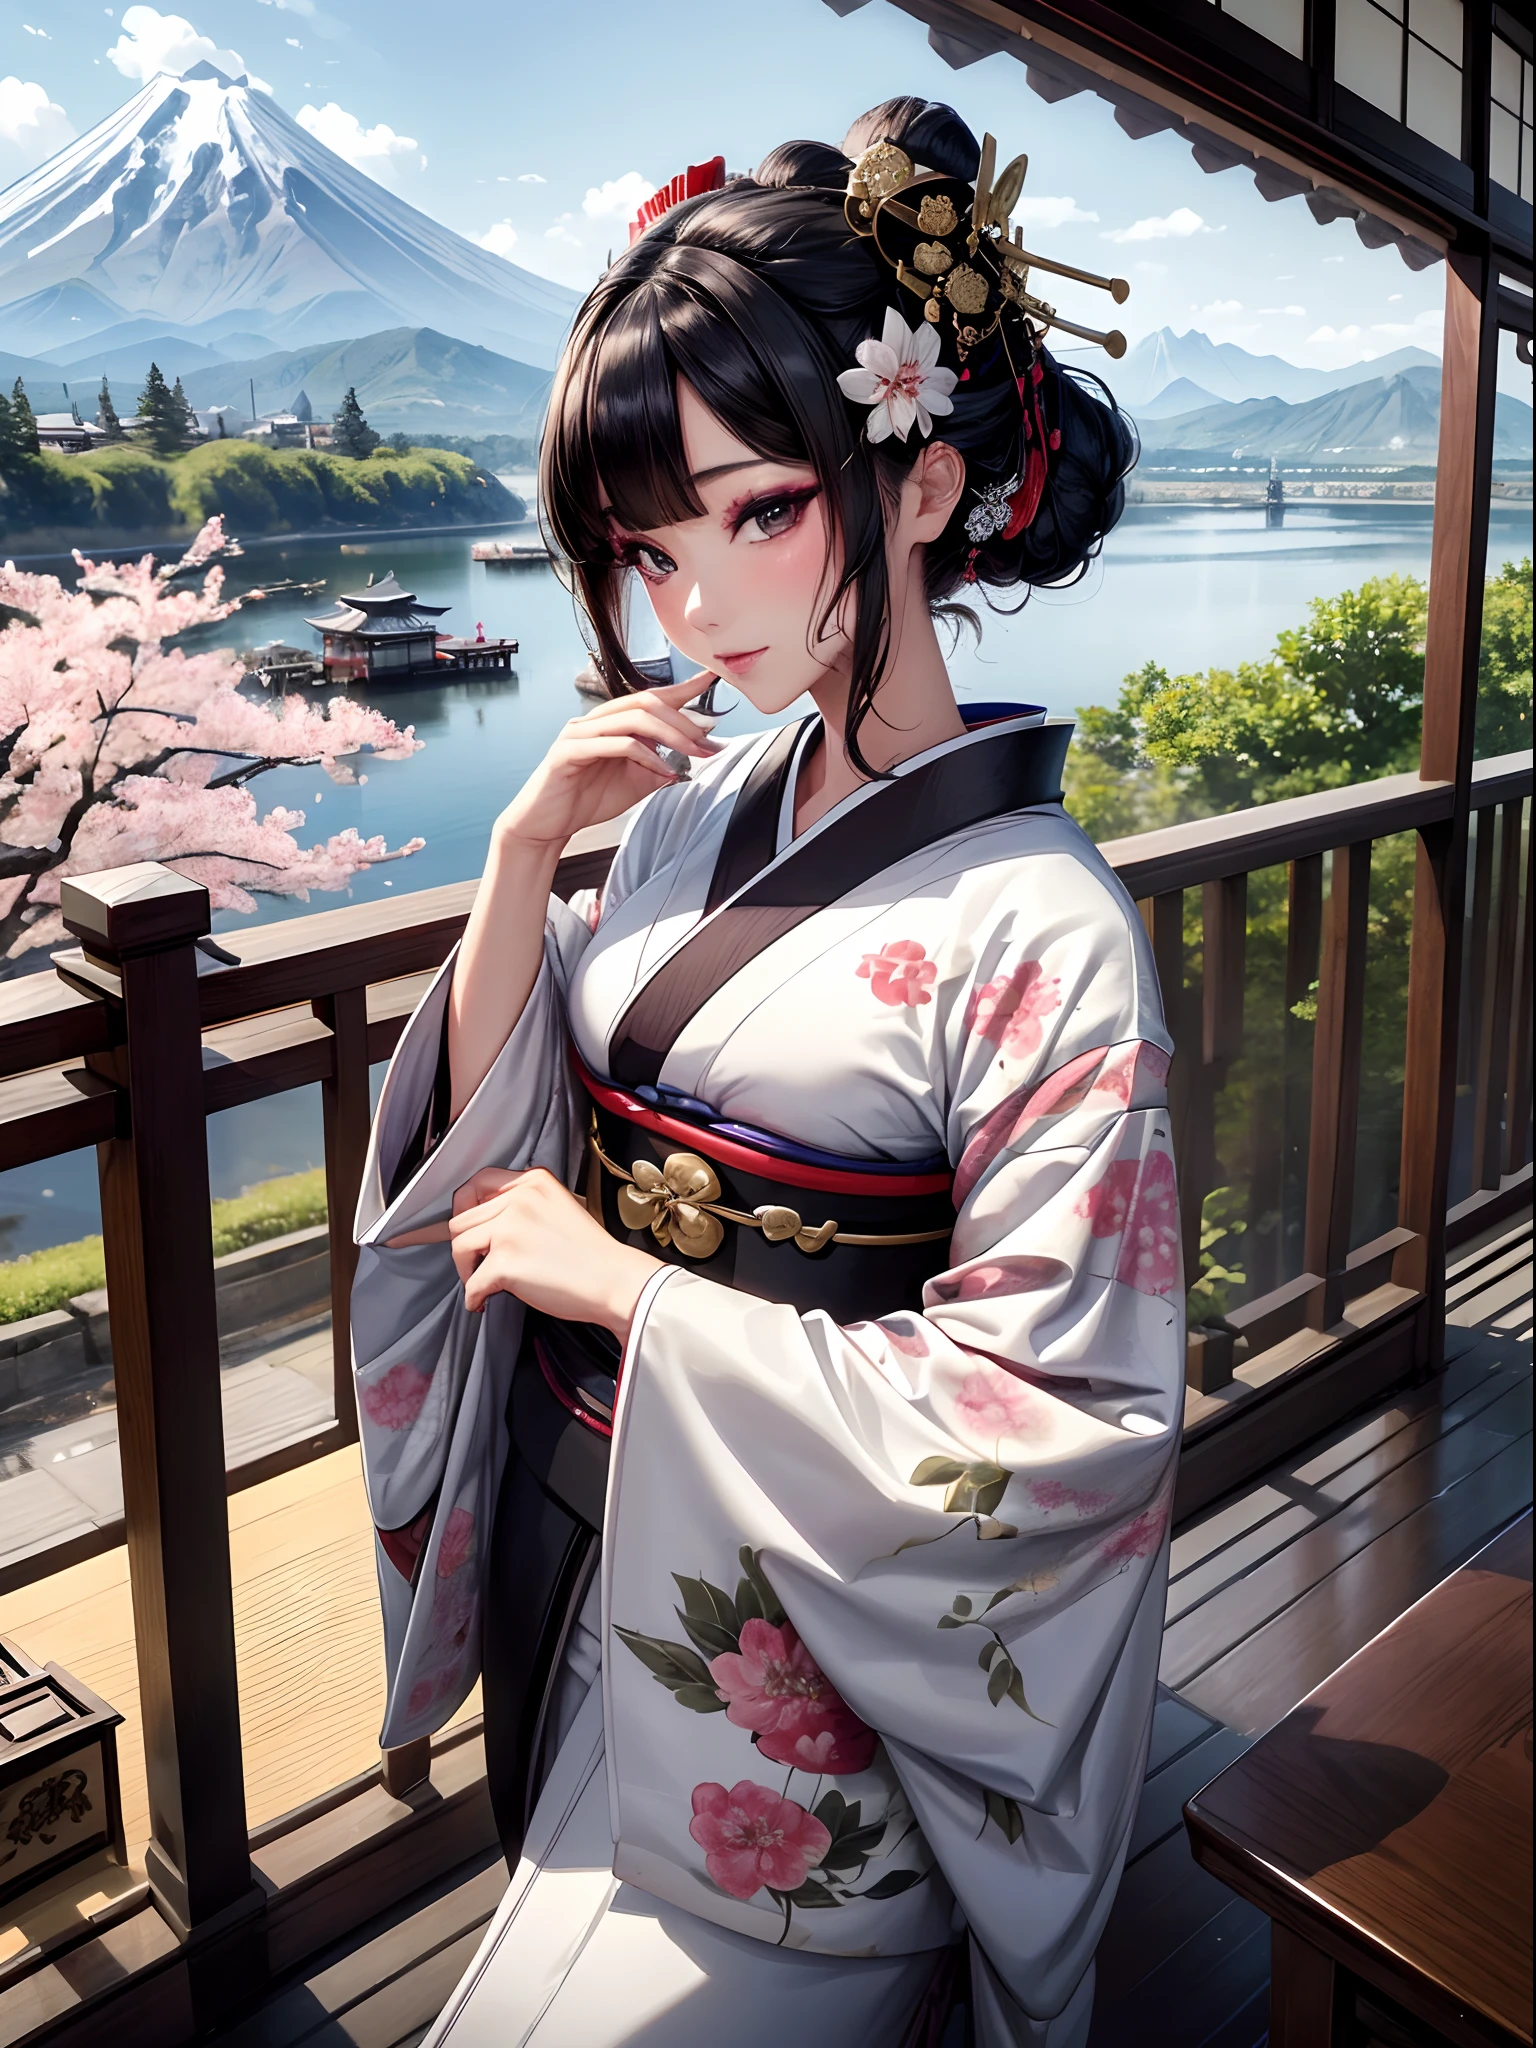 absurderes,(​masterpiece、top-quality、8K ),intricate detailes,ultra-detailliert、1 Beautiful Japan Woman、(geisha,geisha hairstyle、Luxury kimono:1.4),Dress perfectly、luxury hair ornament,A dark-haired、(I can see the mountains. Fuji:1.3),cherry blossom in full bloom、(Thin makeup:1.3),A slight smil、de pele branca、(Sushi:1.2),Hyper realistic,Perfect Anatomy